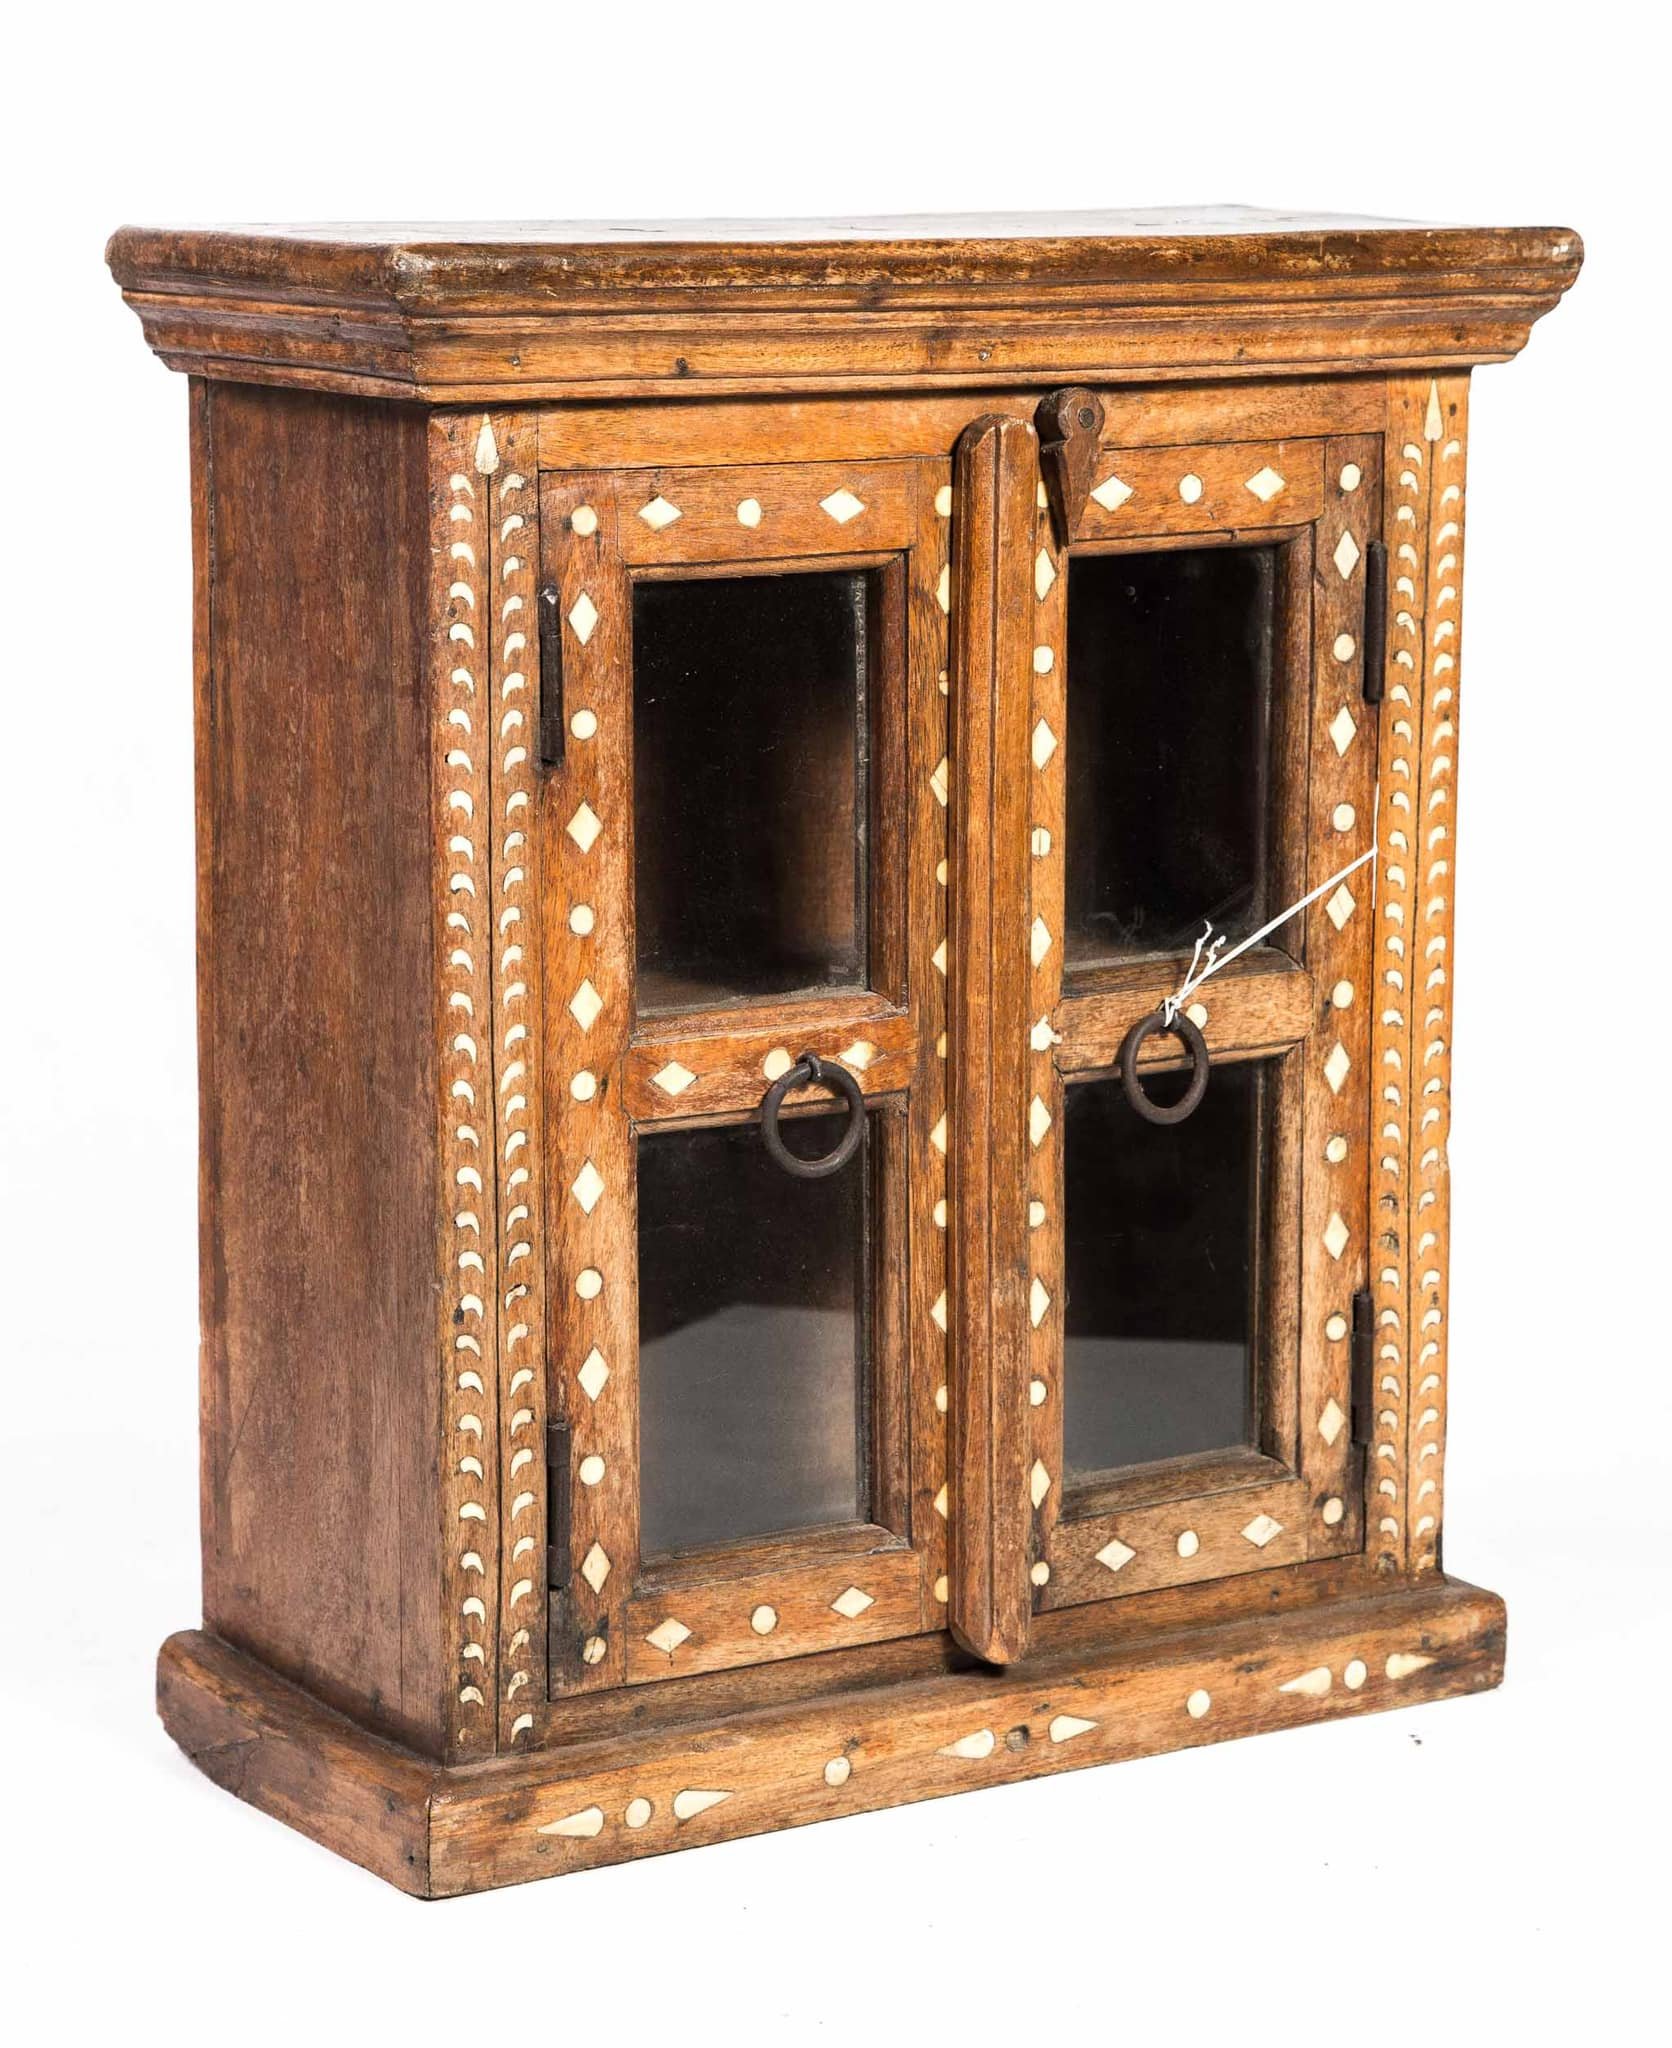 CTS13 Wooden Glass Cabinet with Camel Bones Inlaid